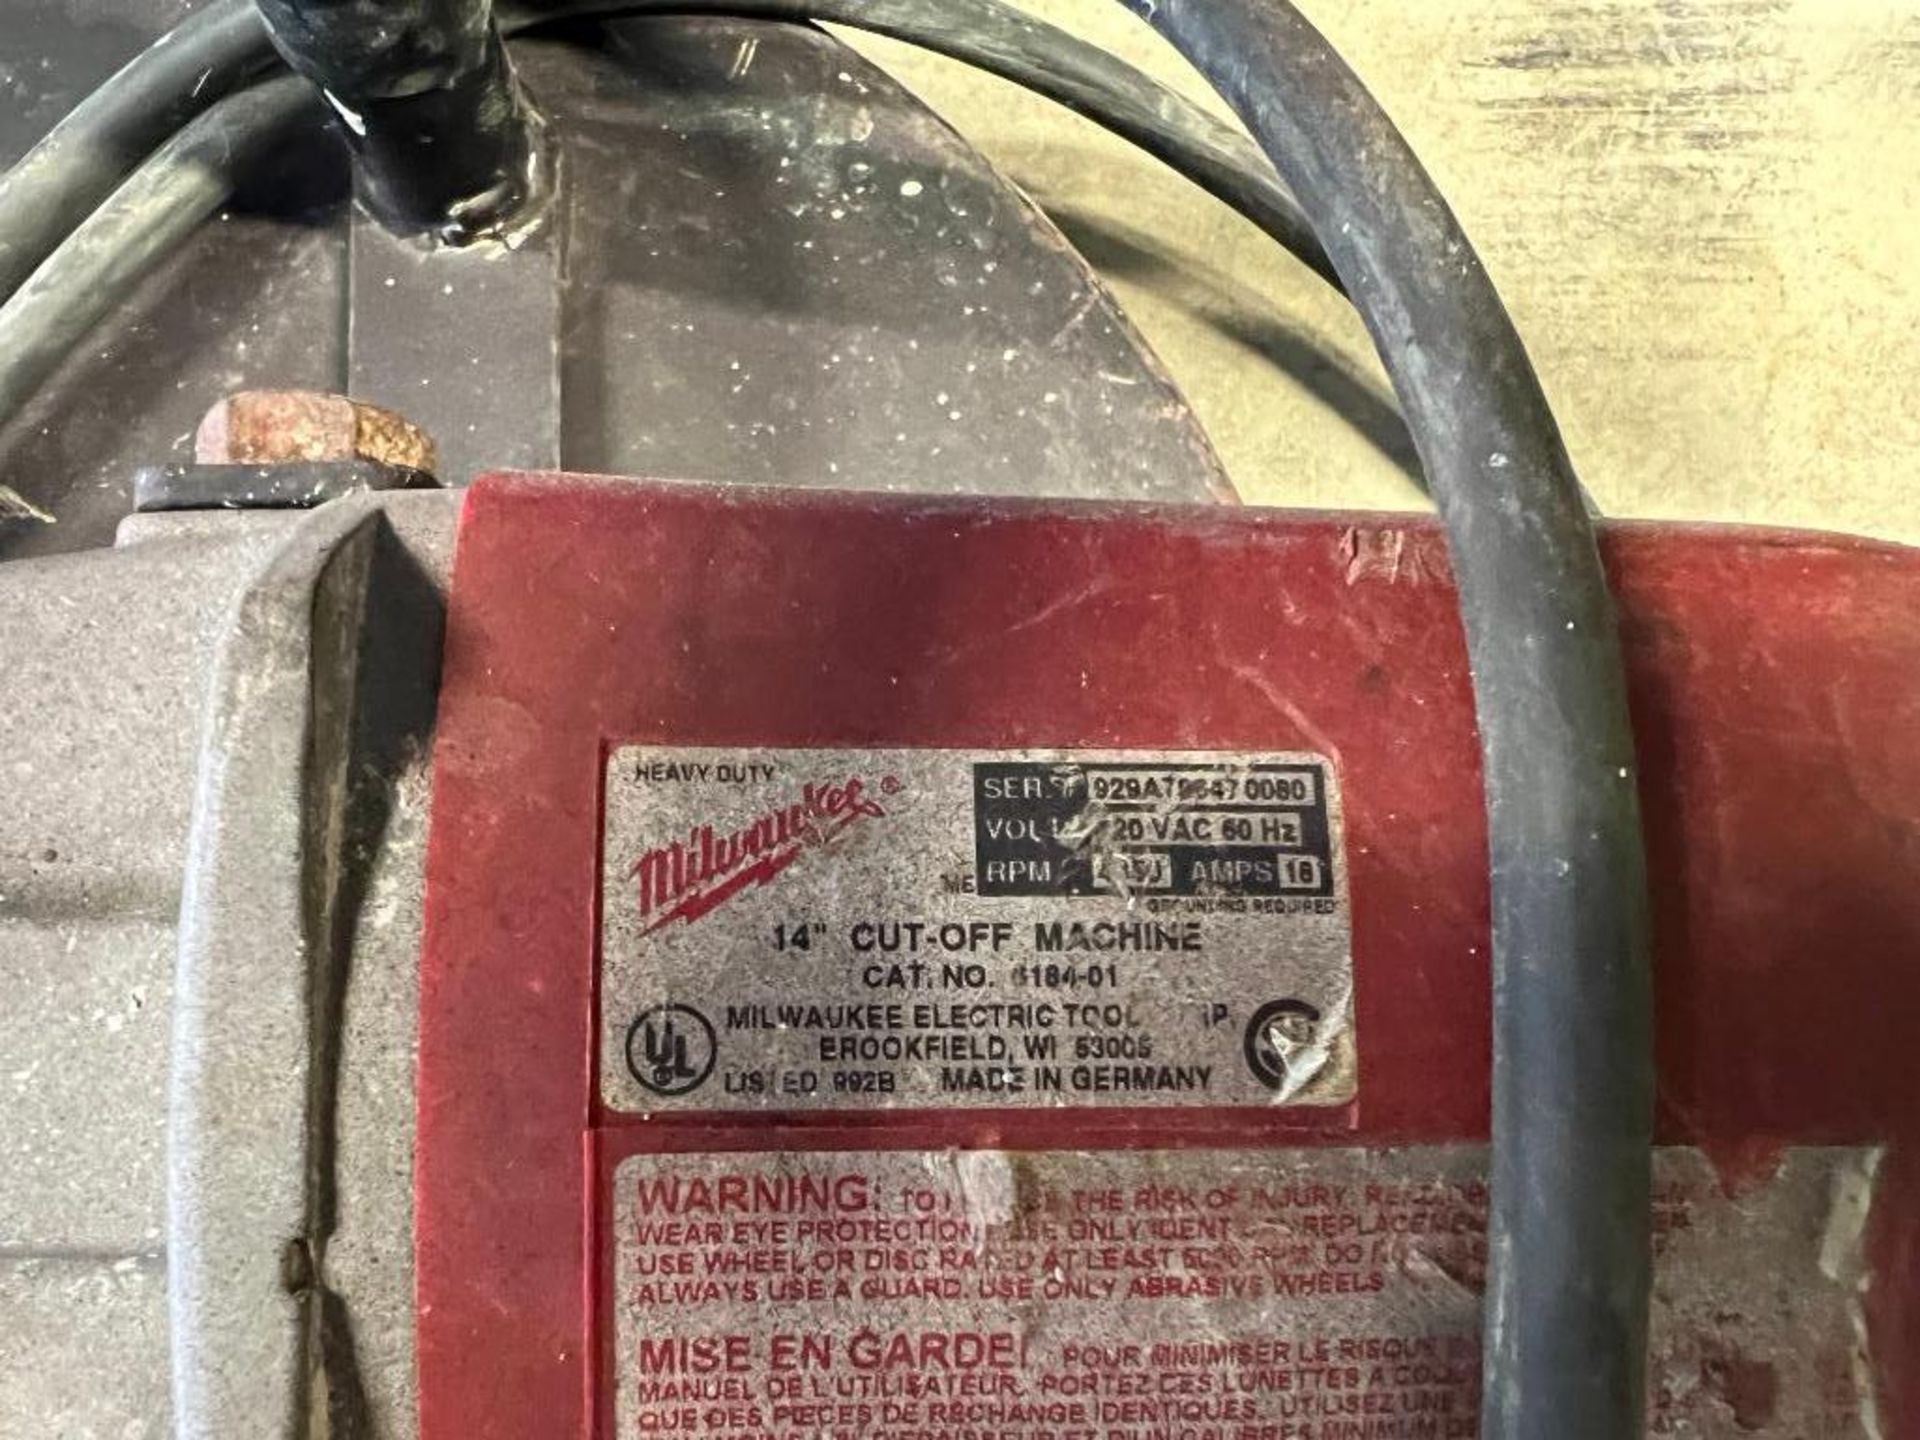 Milwaukee 14" Cut-Off Machine, Serial #929A796470080. Located in Altamont, IL - Image 3 of 4